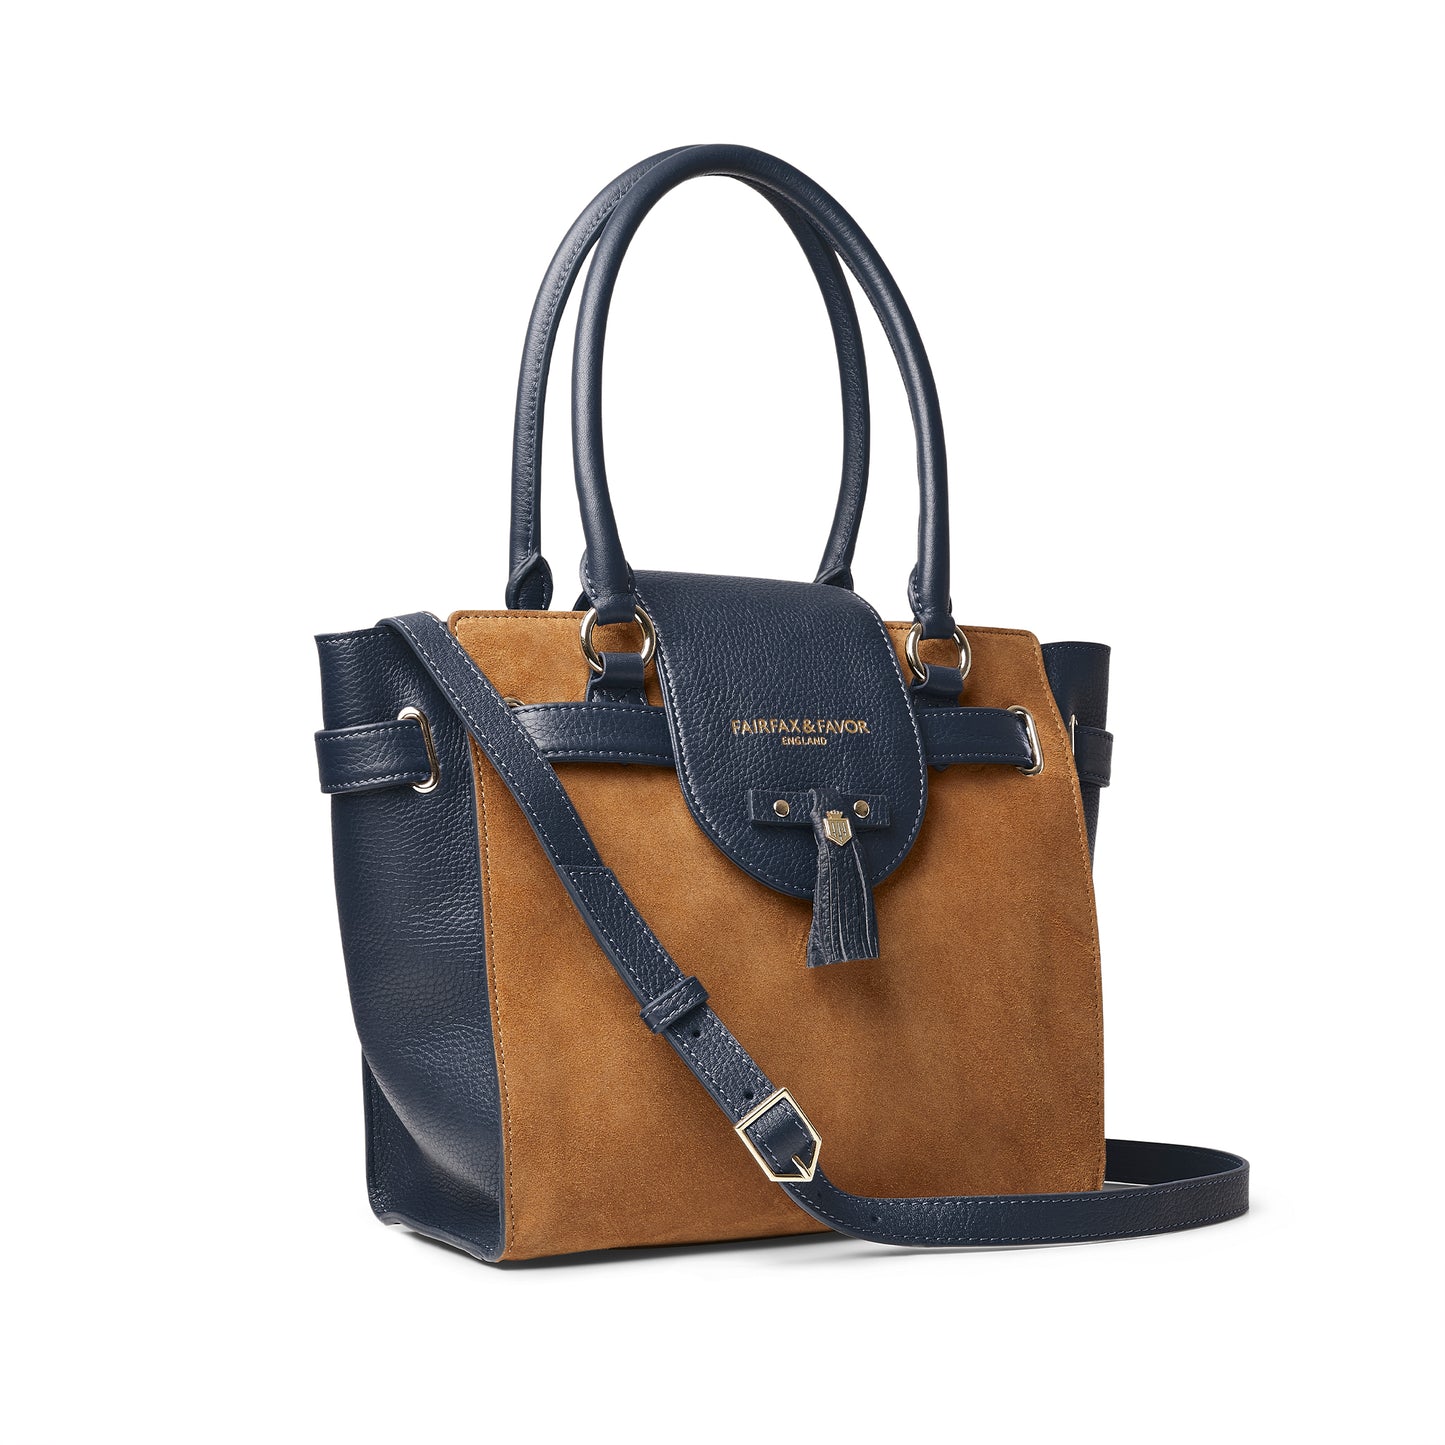 'Windsor Tote' Tan Suede & Navy Leather